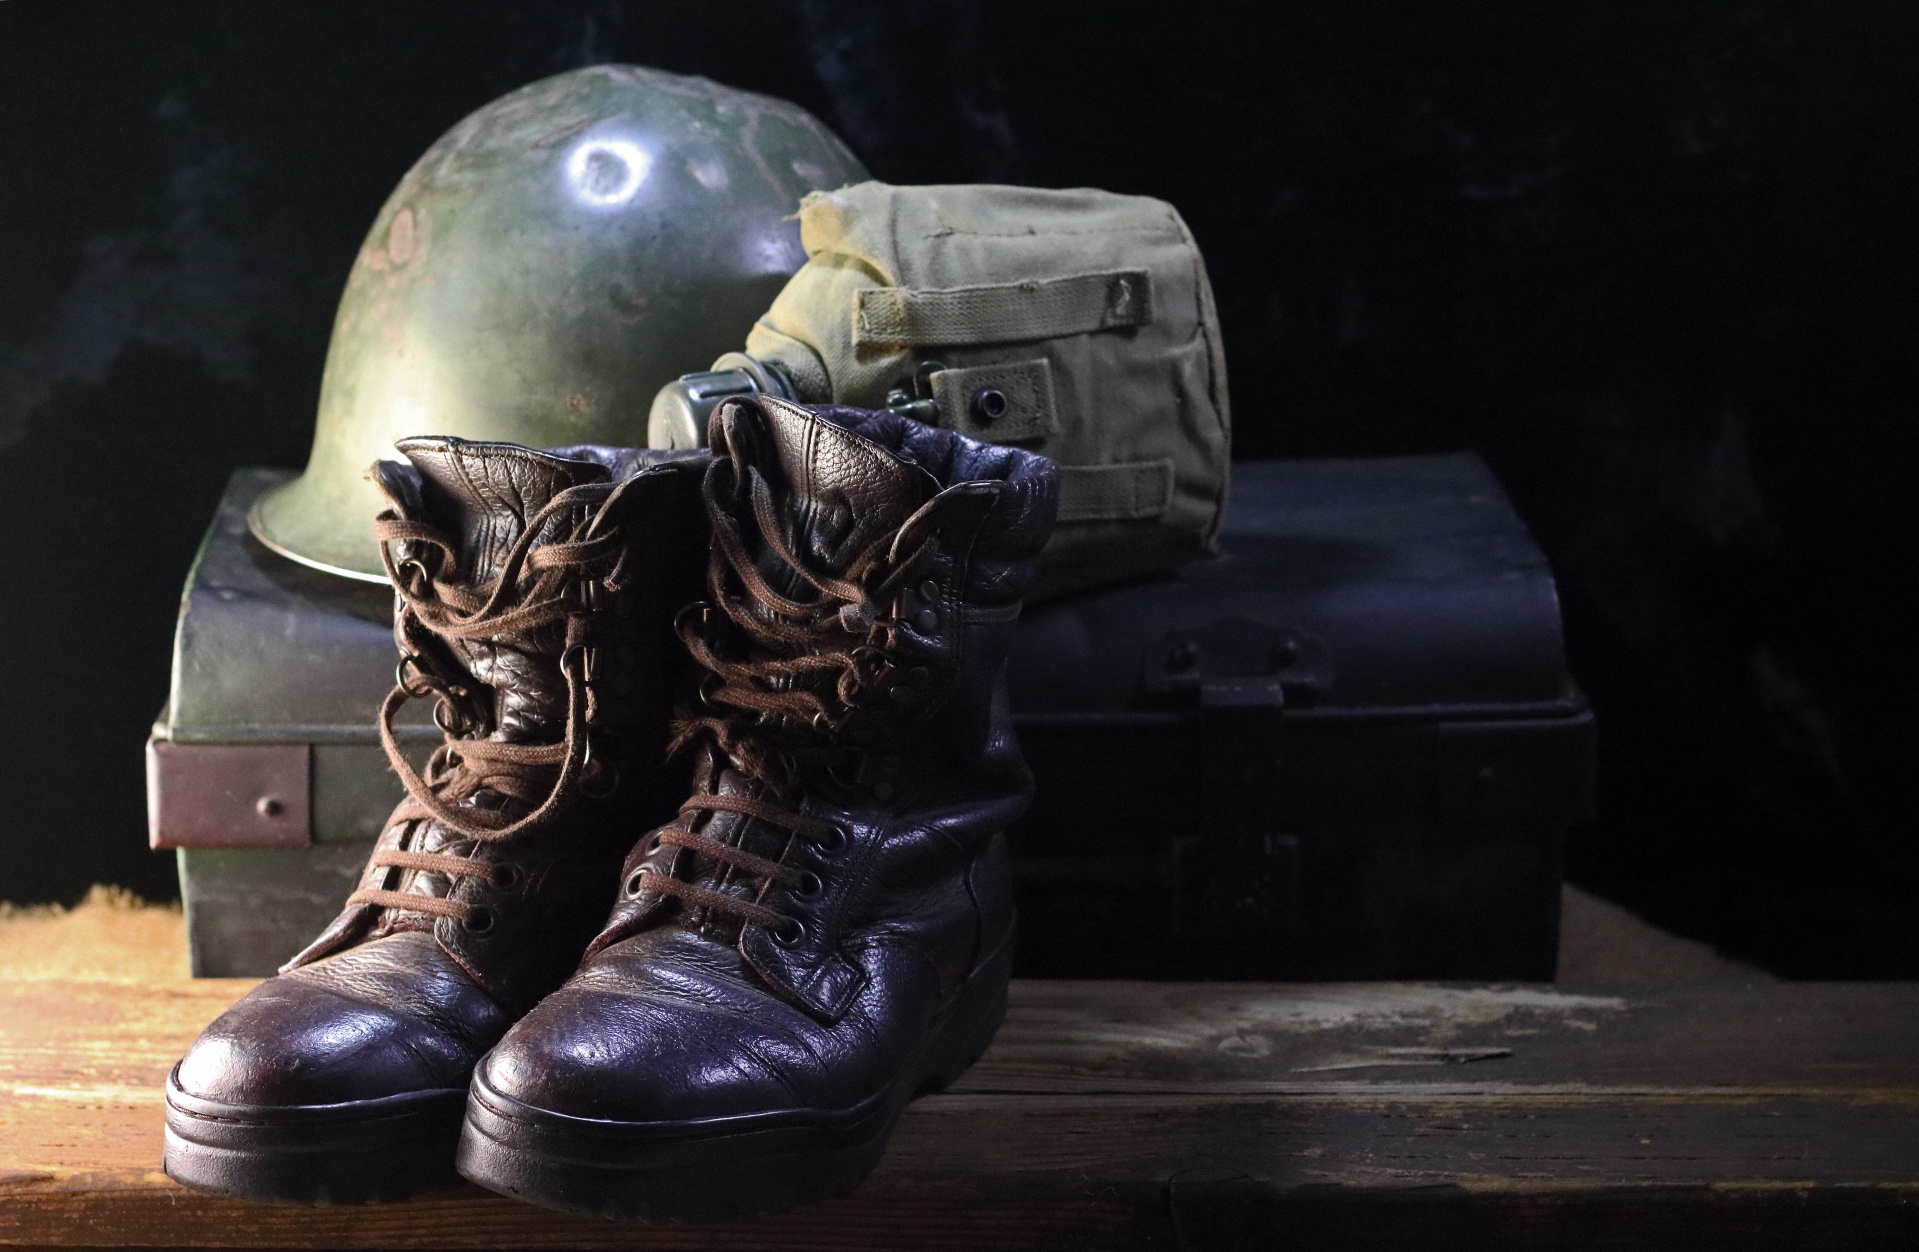 combat boots, helmet and water bottle with a metal trunk